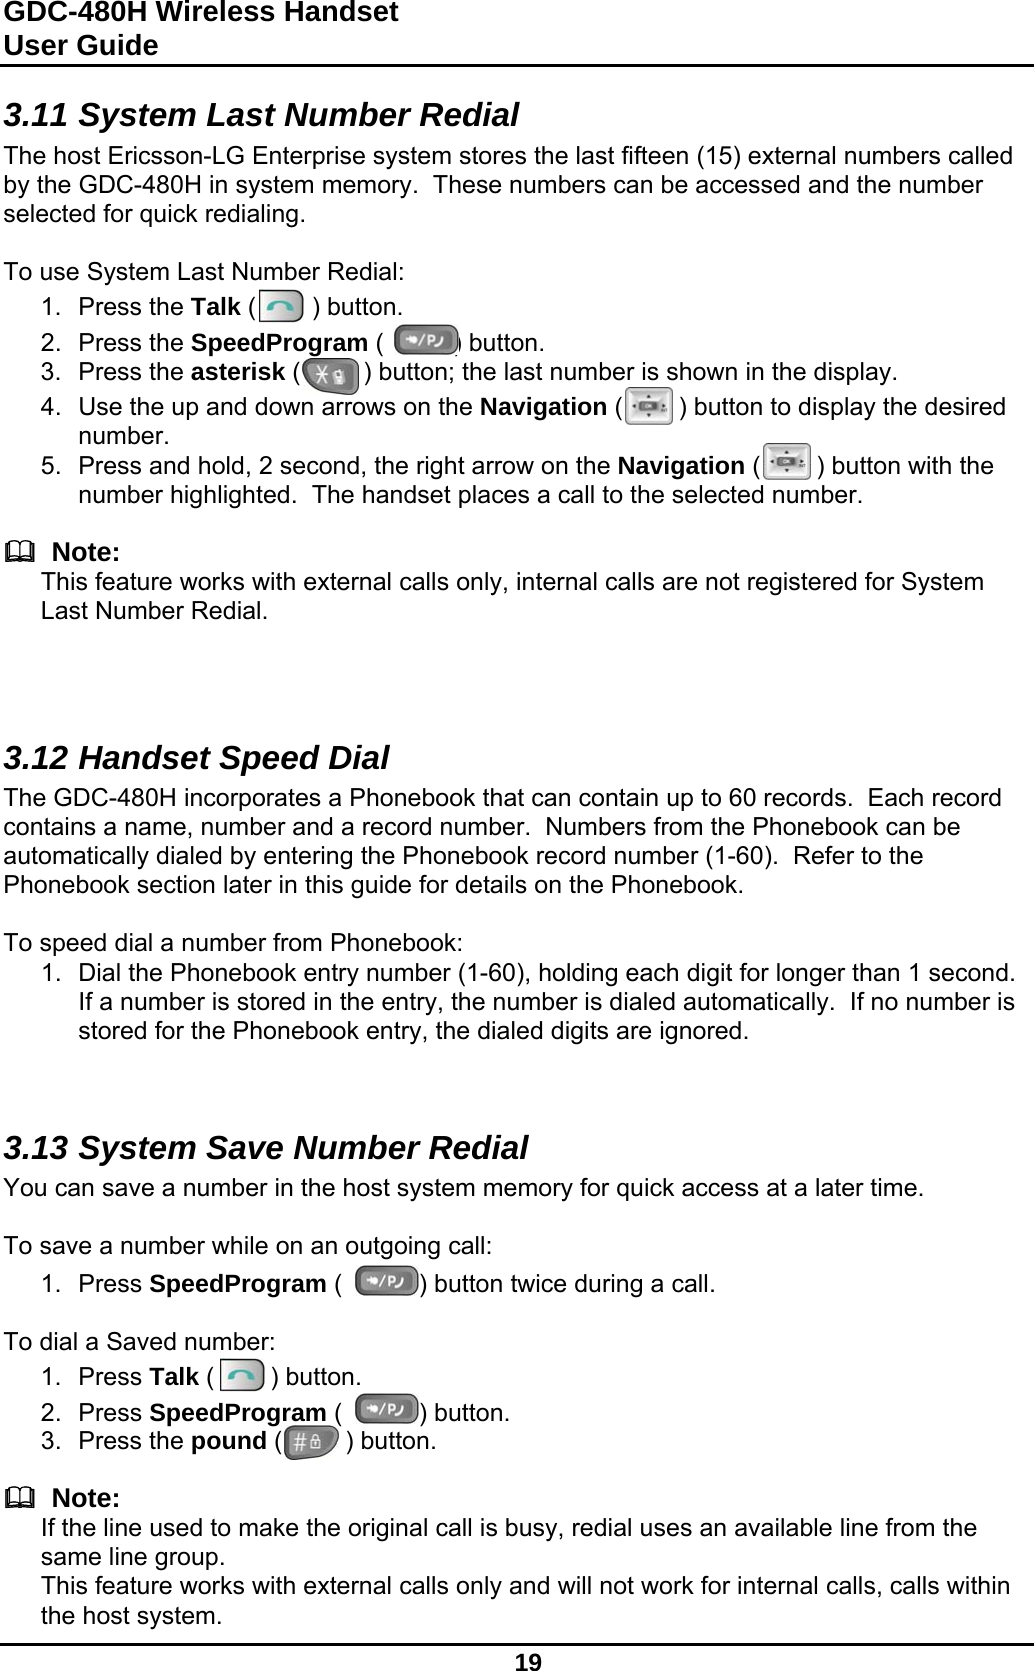 GDC-480H Wireless Handset User Guide   19  3.11 System Last Number Redial The host Ericsson-LG Enterprise system stores the last fifteen (15) external numbers called by the GDC-480H in system memory.  These numbers can be accessed and the number selected for quick redialing.  To use System Last Number Redial: 1. Press the Talk (        ) button. 2. Press the SpeedProgram (          ) button. 3. Press the asterisk (         ) button; the last number is shown in the display. 4.  Use the up and down arrows on the Navigation (        ) button to display the desired number. 5.  Press and hold, 2 second, the right arrow on the Navigation (        ) button with the number highlighted.  The handset places a call to the selected number.    Note: This feature works with external calls only, internal calls are not registered for System Last Number Redial.    3.12 Handset Speed Dial The GDC-480H incorporates a Phonebook that can contain up to 60 records.  Each record contains a name, number and a record number.  Numbers from the Phonebook can be automatically dialed by entering the Phonebook record number (1-60).  Refer to the Phonebook section later in this guide for details on the Phonebook.  To speed dial a number from Phonebook: 1.  Dial the Phonebook entry number (1-60), holding each digit for longer than 1 second.  If a number is stored in the entry, the number is dialed automatically.  If no number is stored for the Phonebook entry, the dialed digits are ignored.   3.13 System Save Number Redial You can save a number in the host system memory for quick access at a later time.  To save a number while on an outgoing call: 1. Press SpeedProgram (           ) button twice during a call.  To dial a Saved number: 1. Press Talk (        ) button. 2. Press SpeedProgram (           ) button. 3. Press the pound (         ) button.    Note: If the line used to make the original call is busy, redial uses an available line from the same line group. This feature works with external calls only and will not work for internal calls, calls within the host system. 